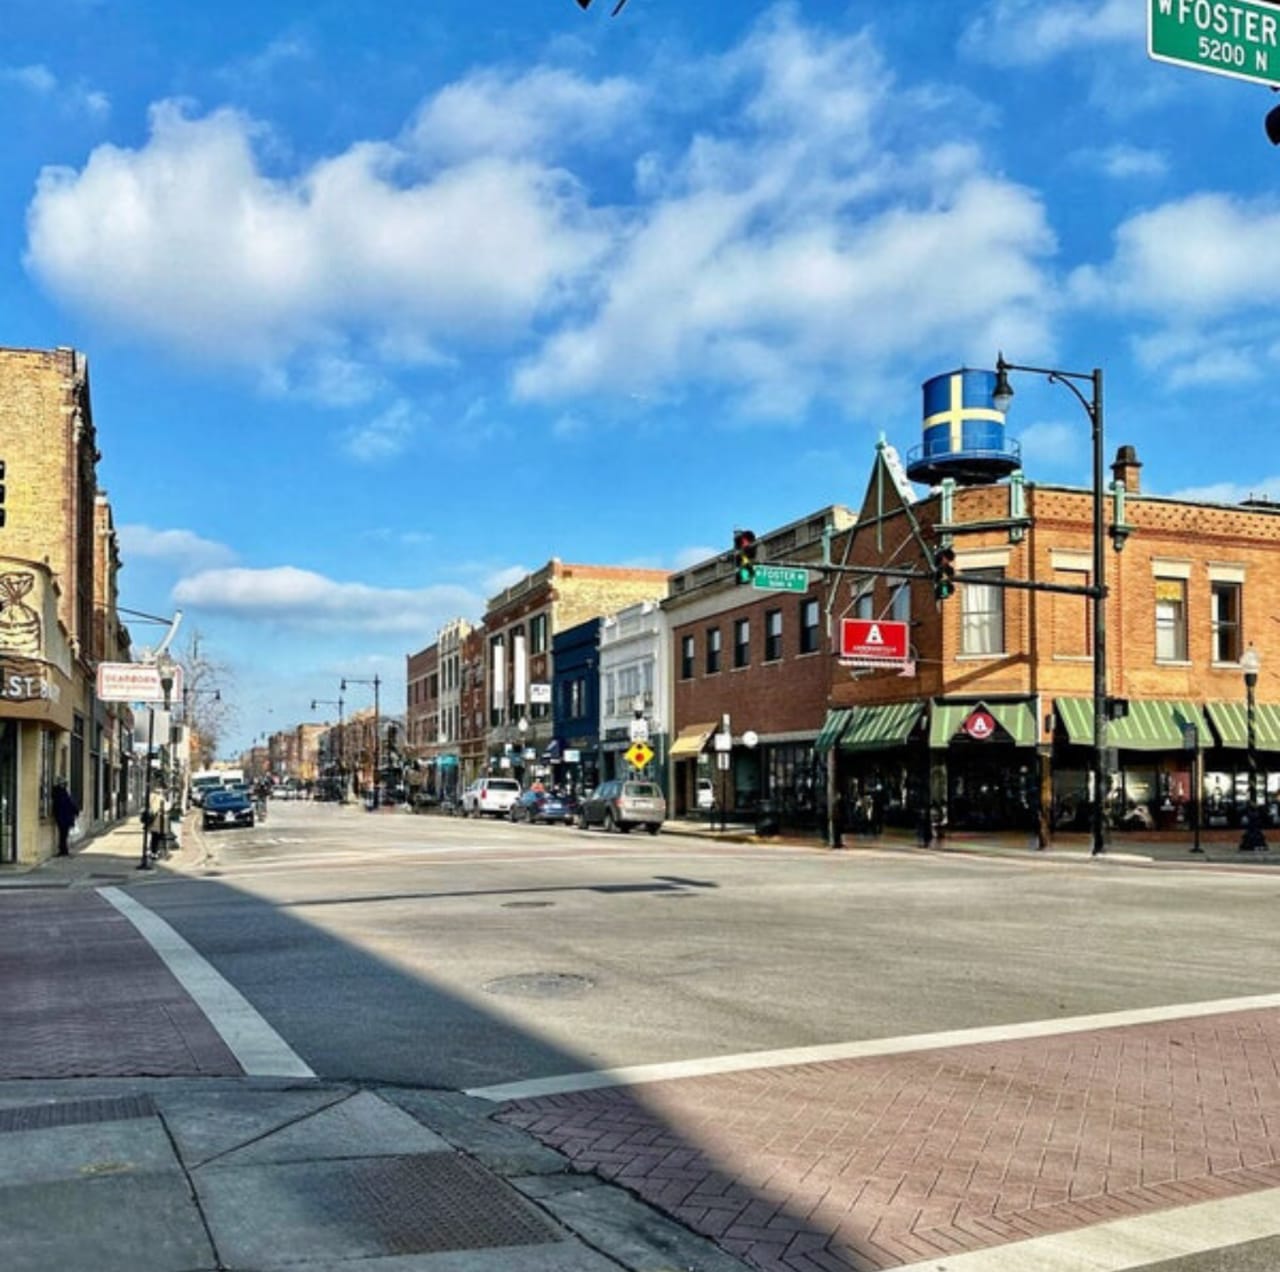 Move on up to Andersonville: One of the Coolest Neighborhoods in the World!